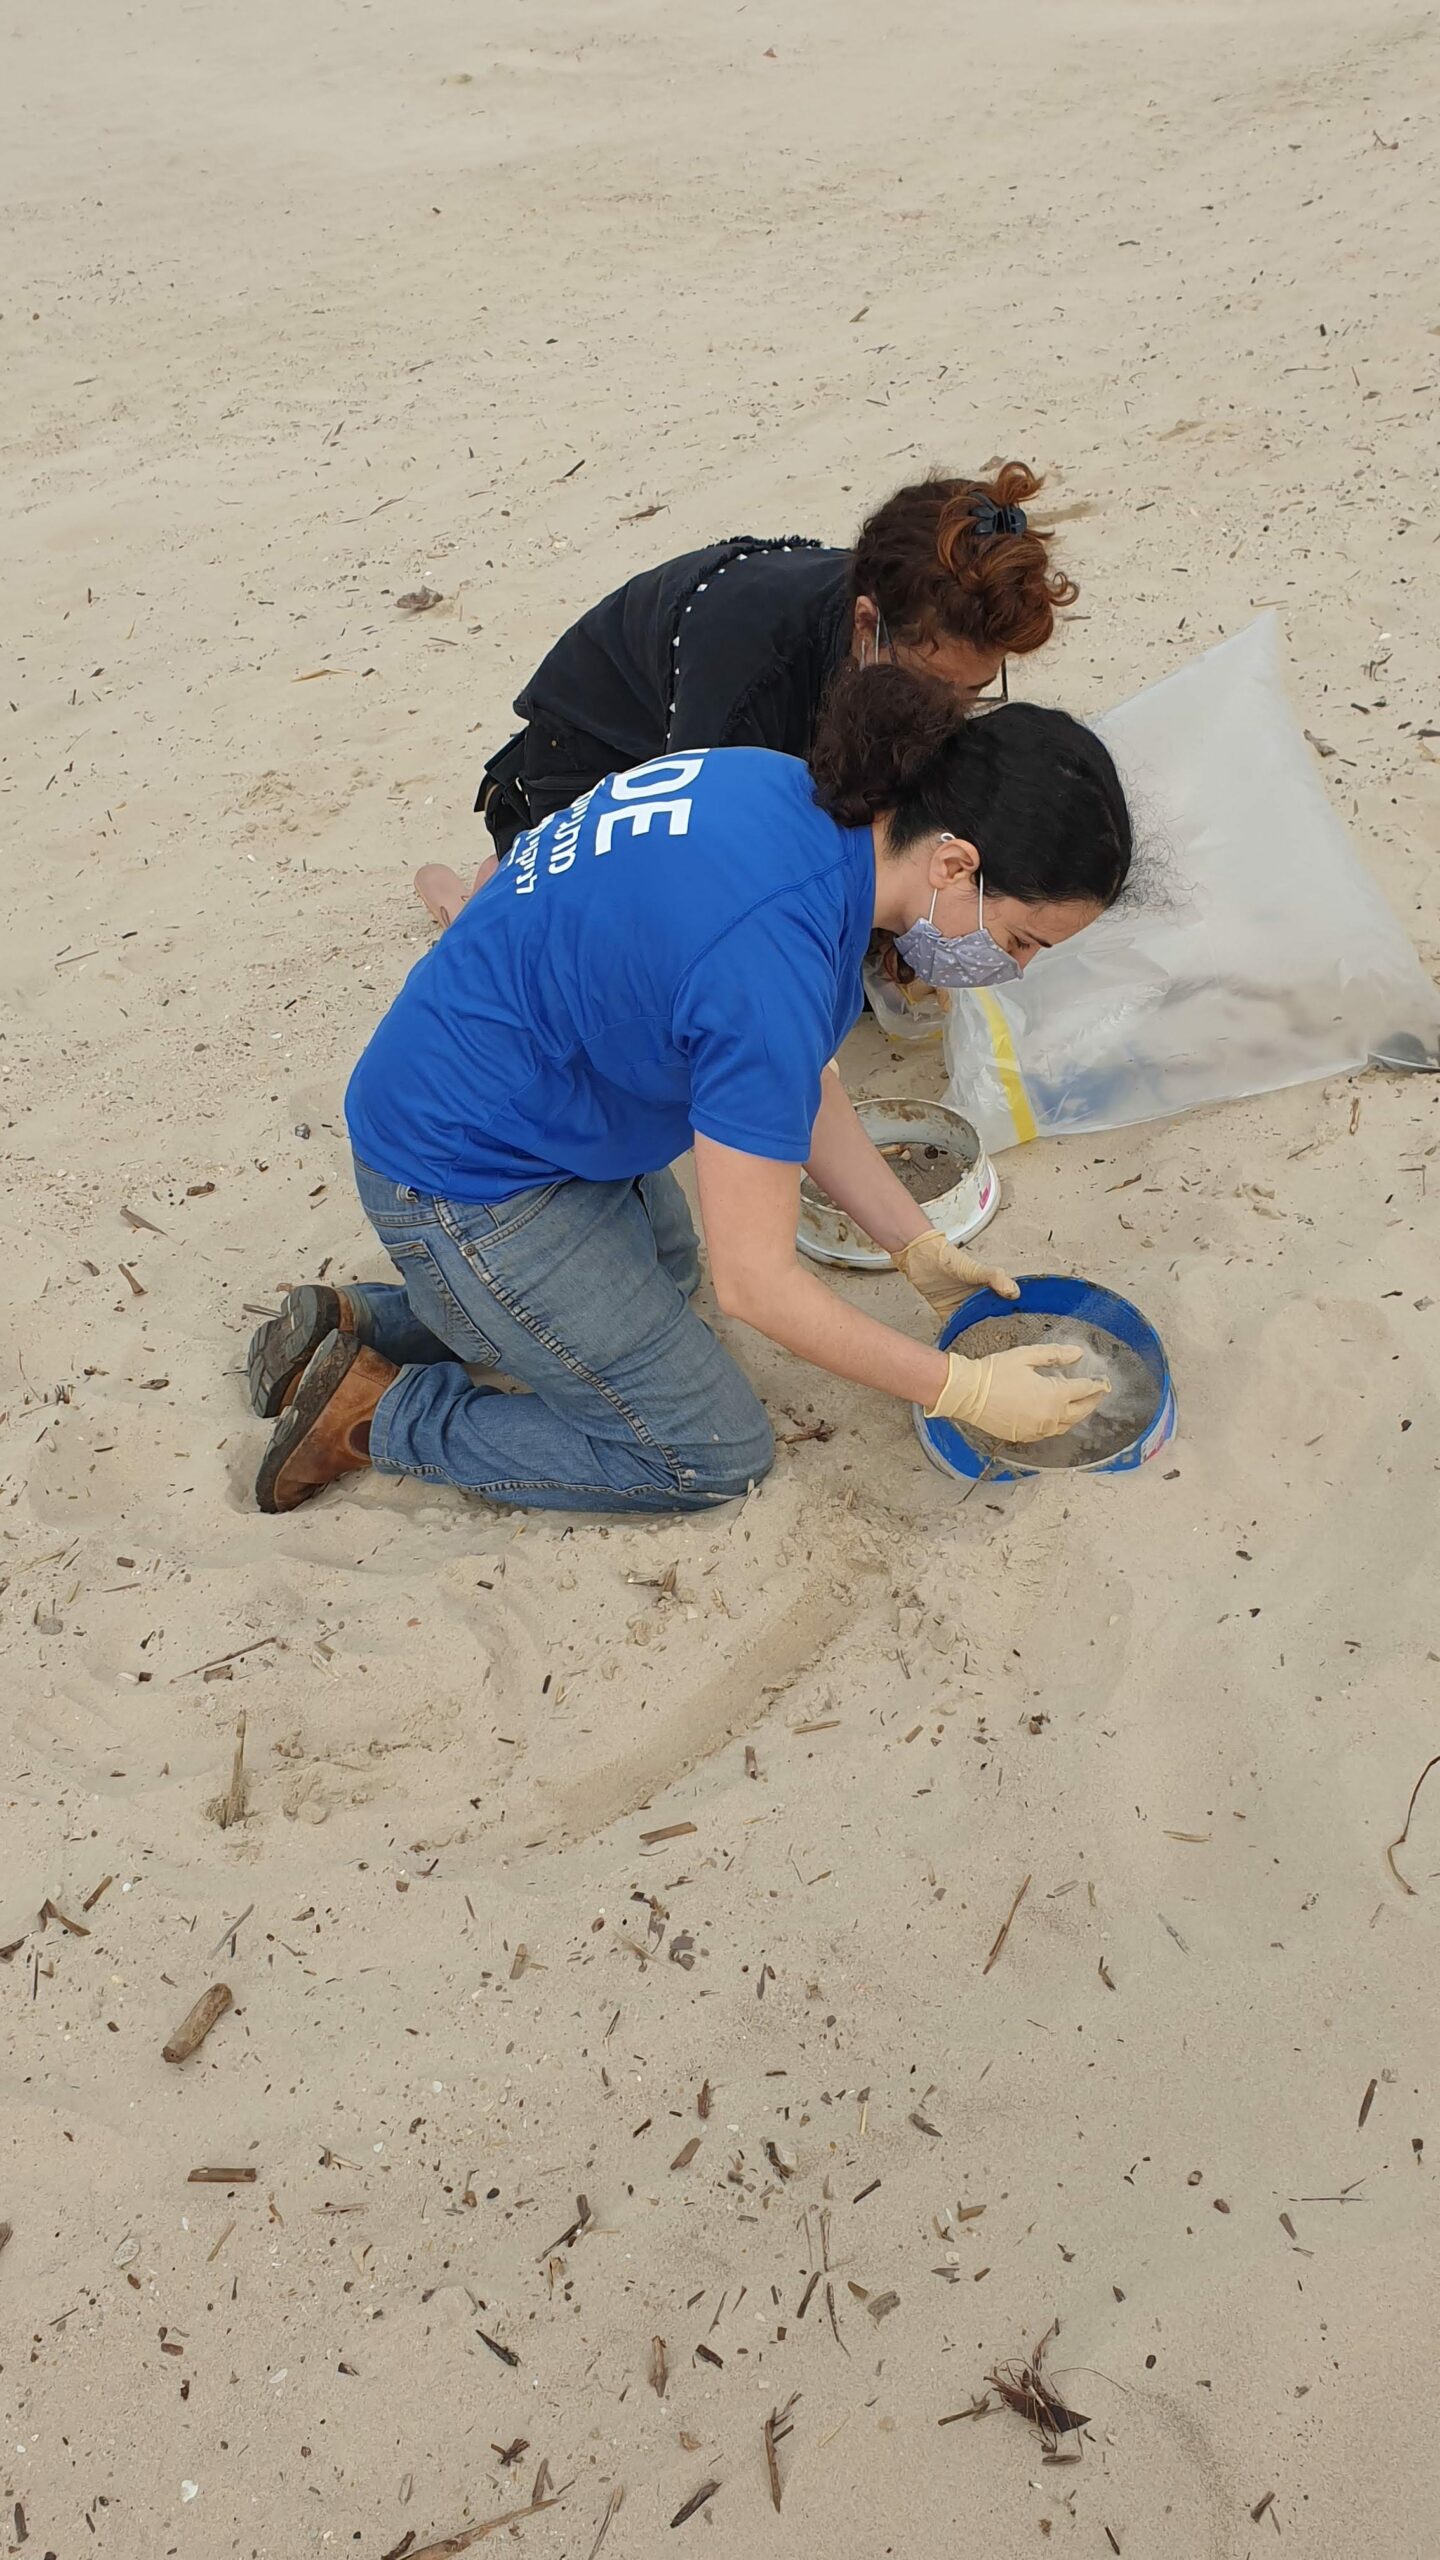 IDE Teams Up with Omis Water and EcoOcean to Clean Hadera Coastline Following Marine Oil Spill